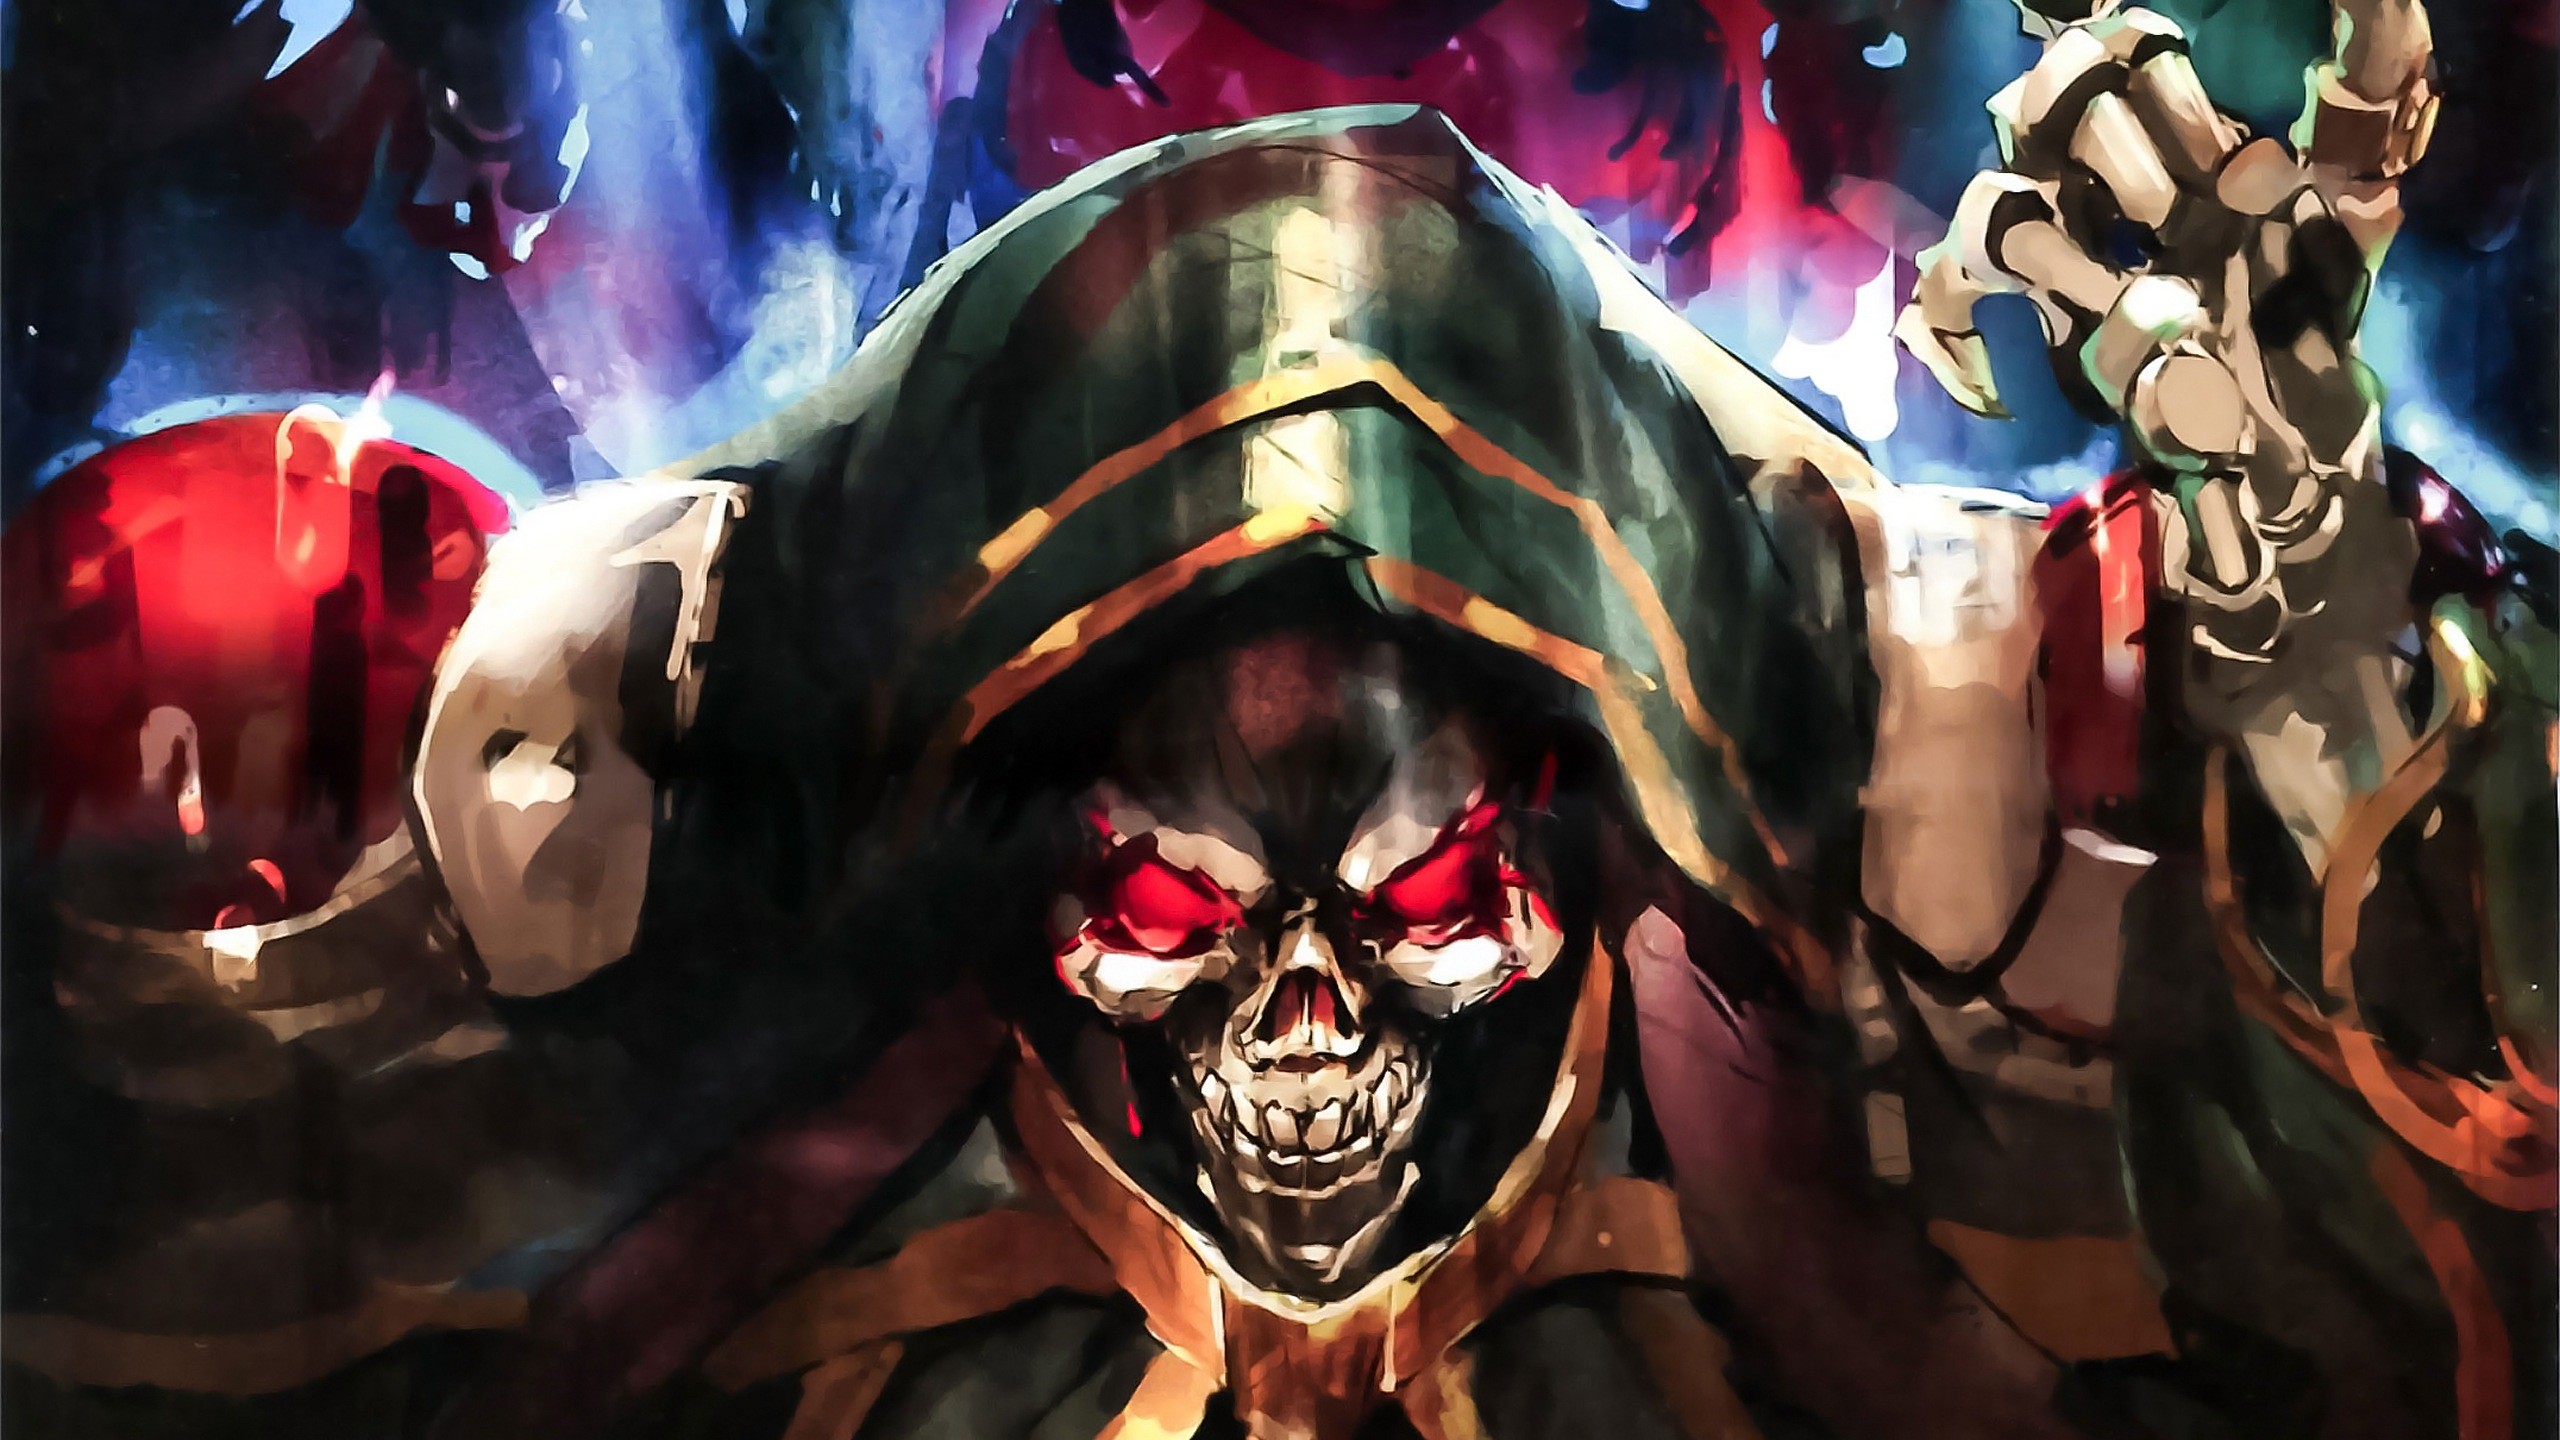 Overlord Wallpaper Wallpapertag Images, Photos, Reviews